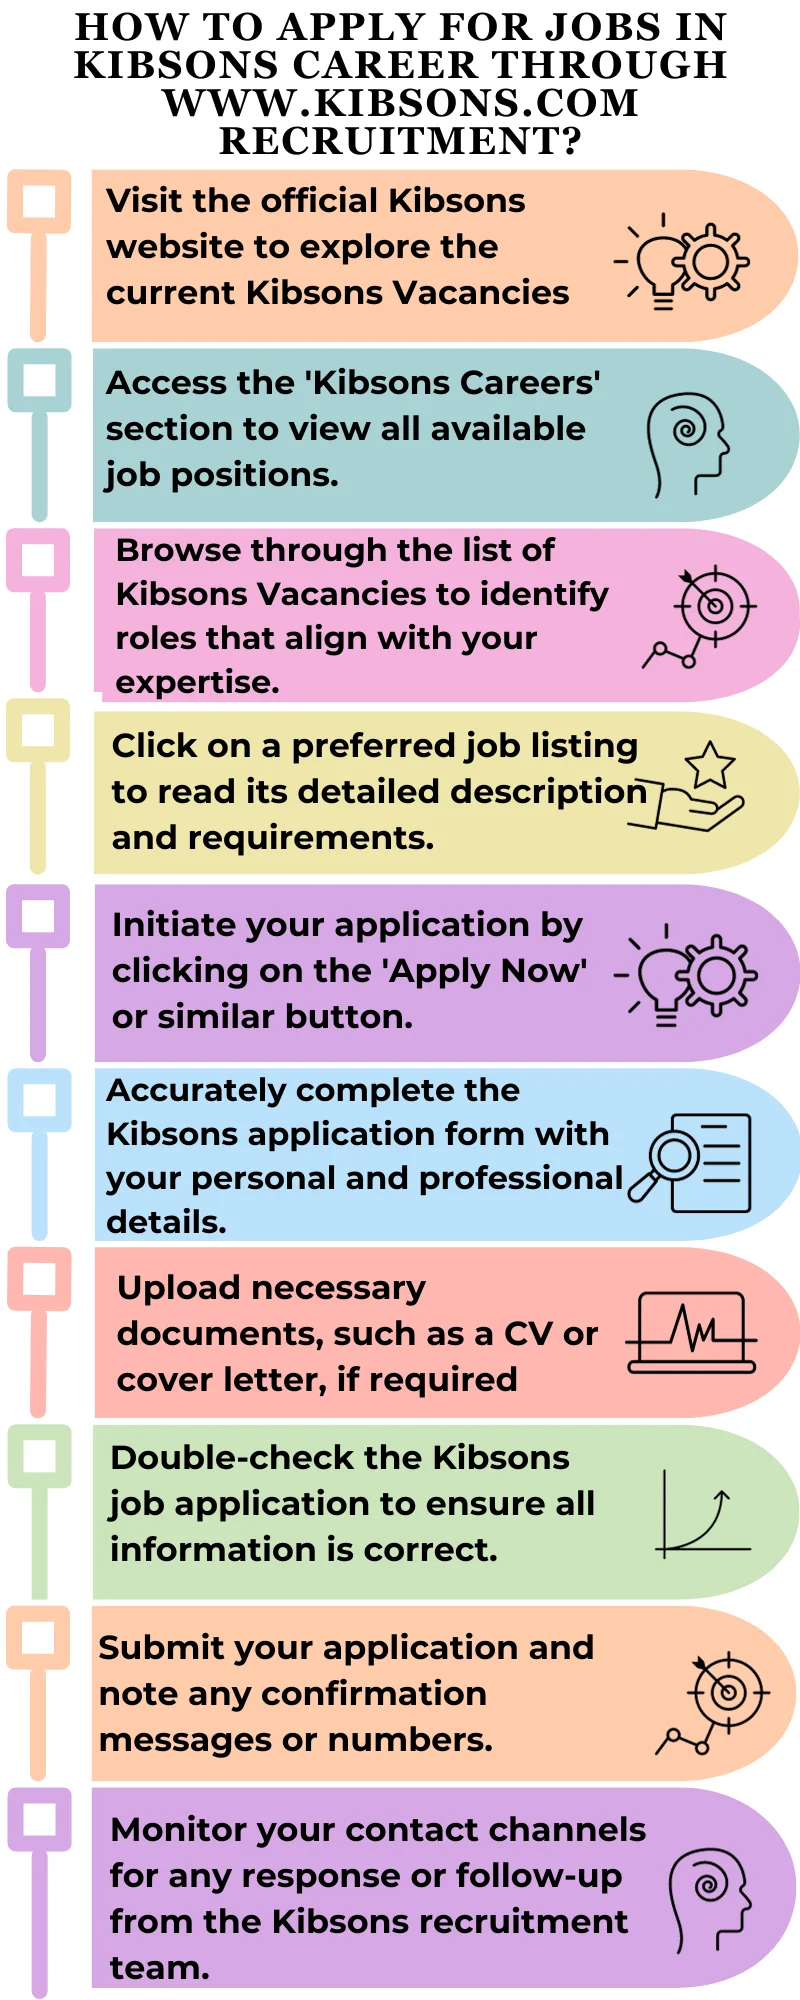 How to Apply for Jobs in Kibsons Career through www.kibsons.com recruitment?